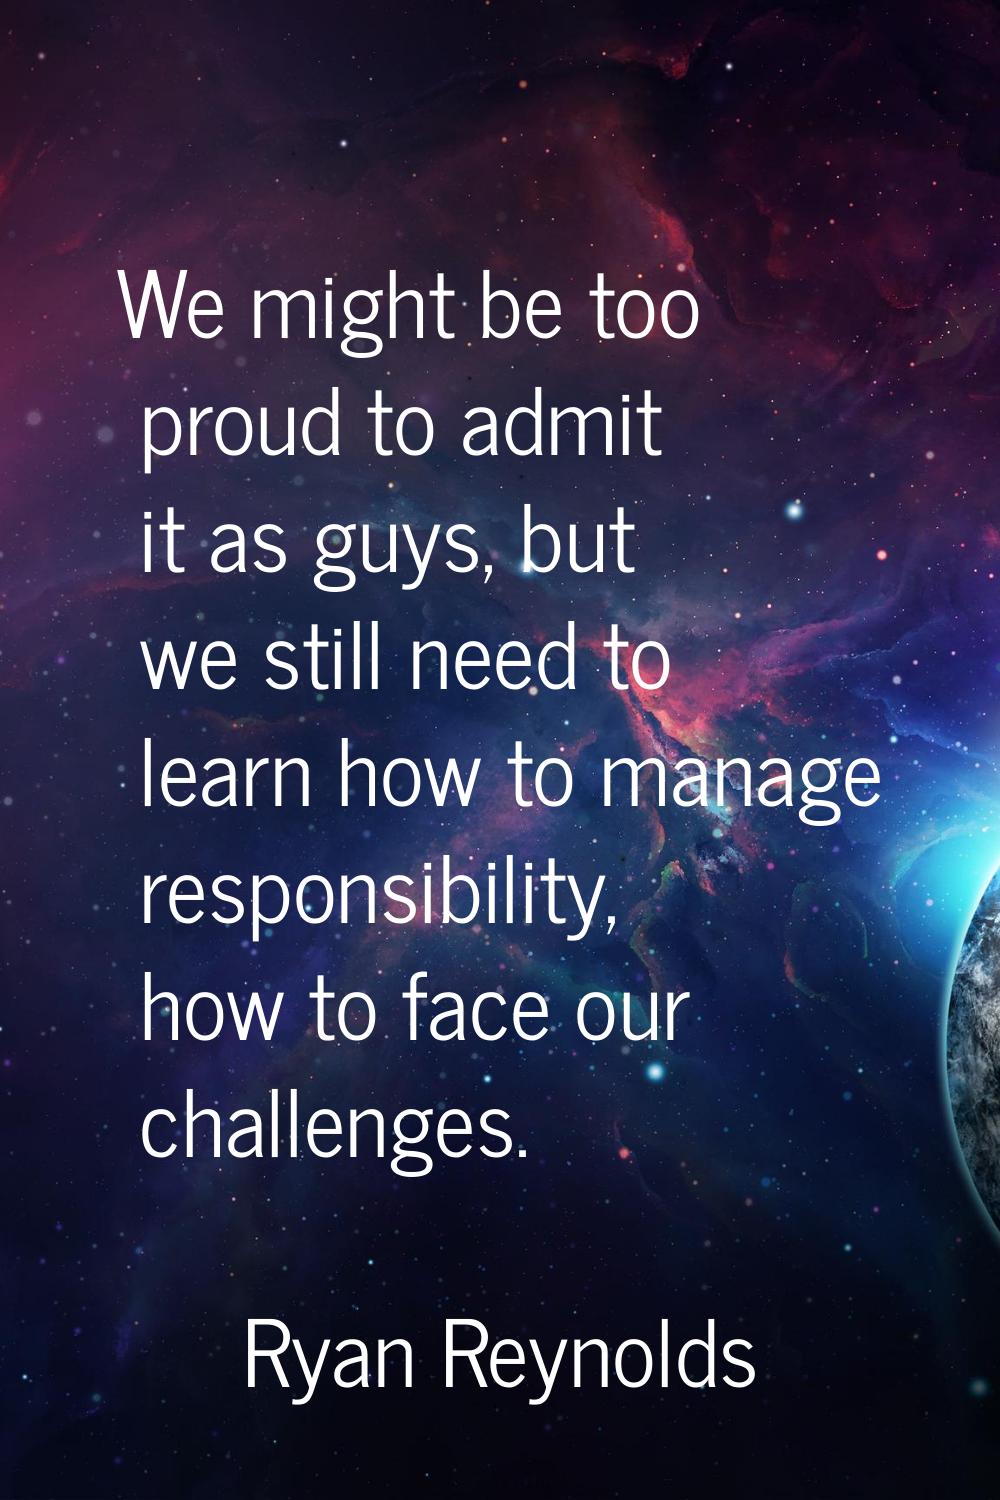 We might be too proud to admit it as guys, but we still need to learn how to manage responsibility,